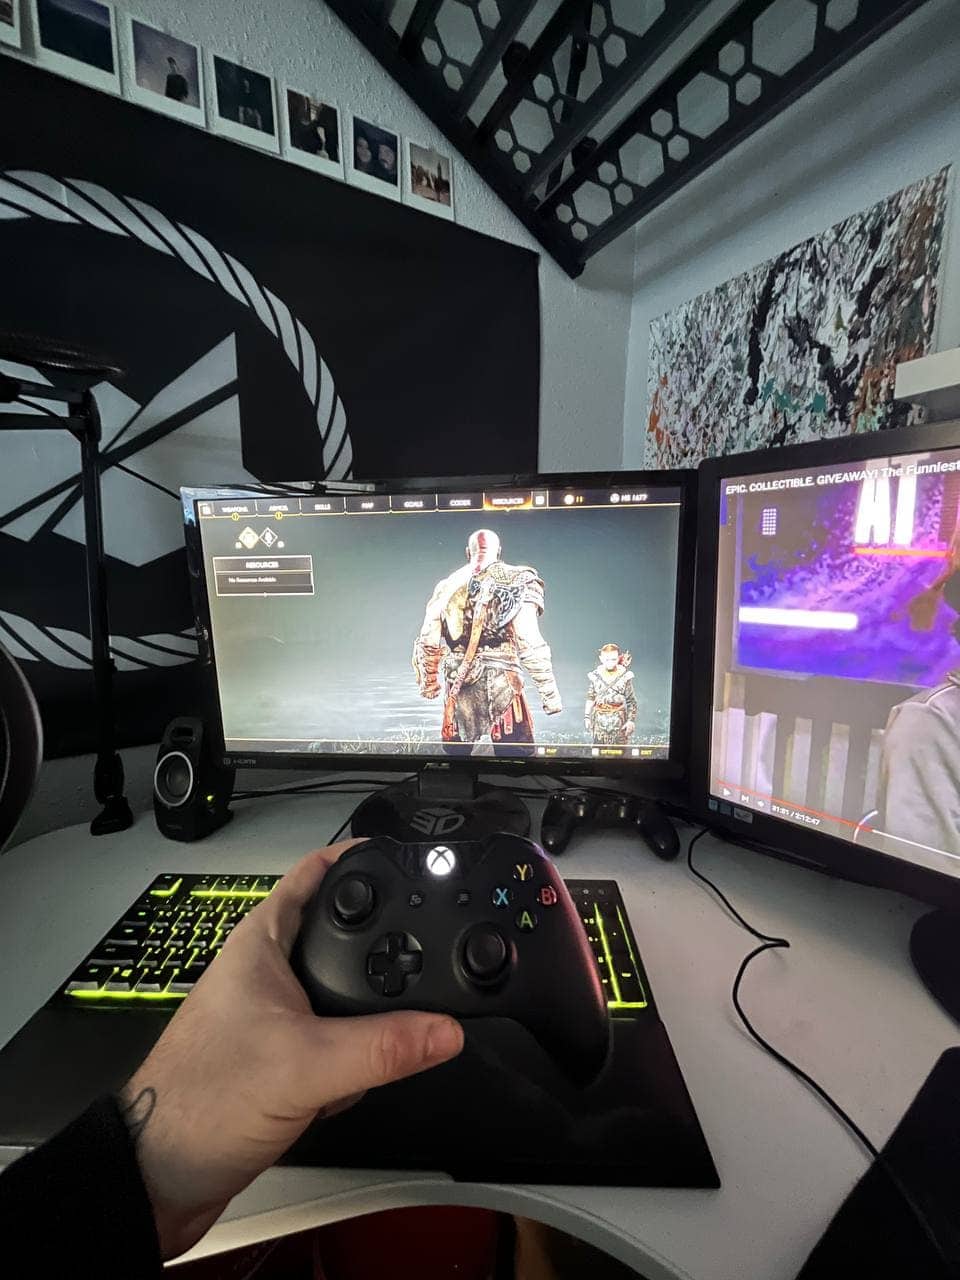 Gamer's dream setup with computer and xbox controller